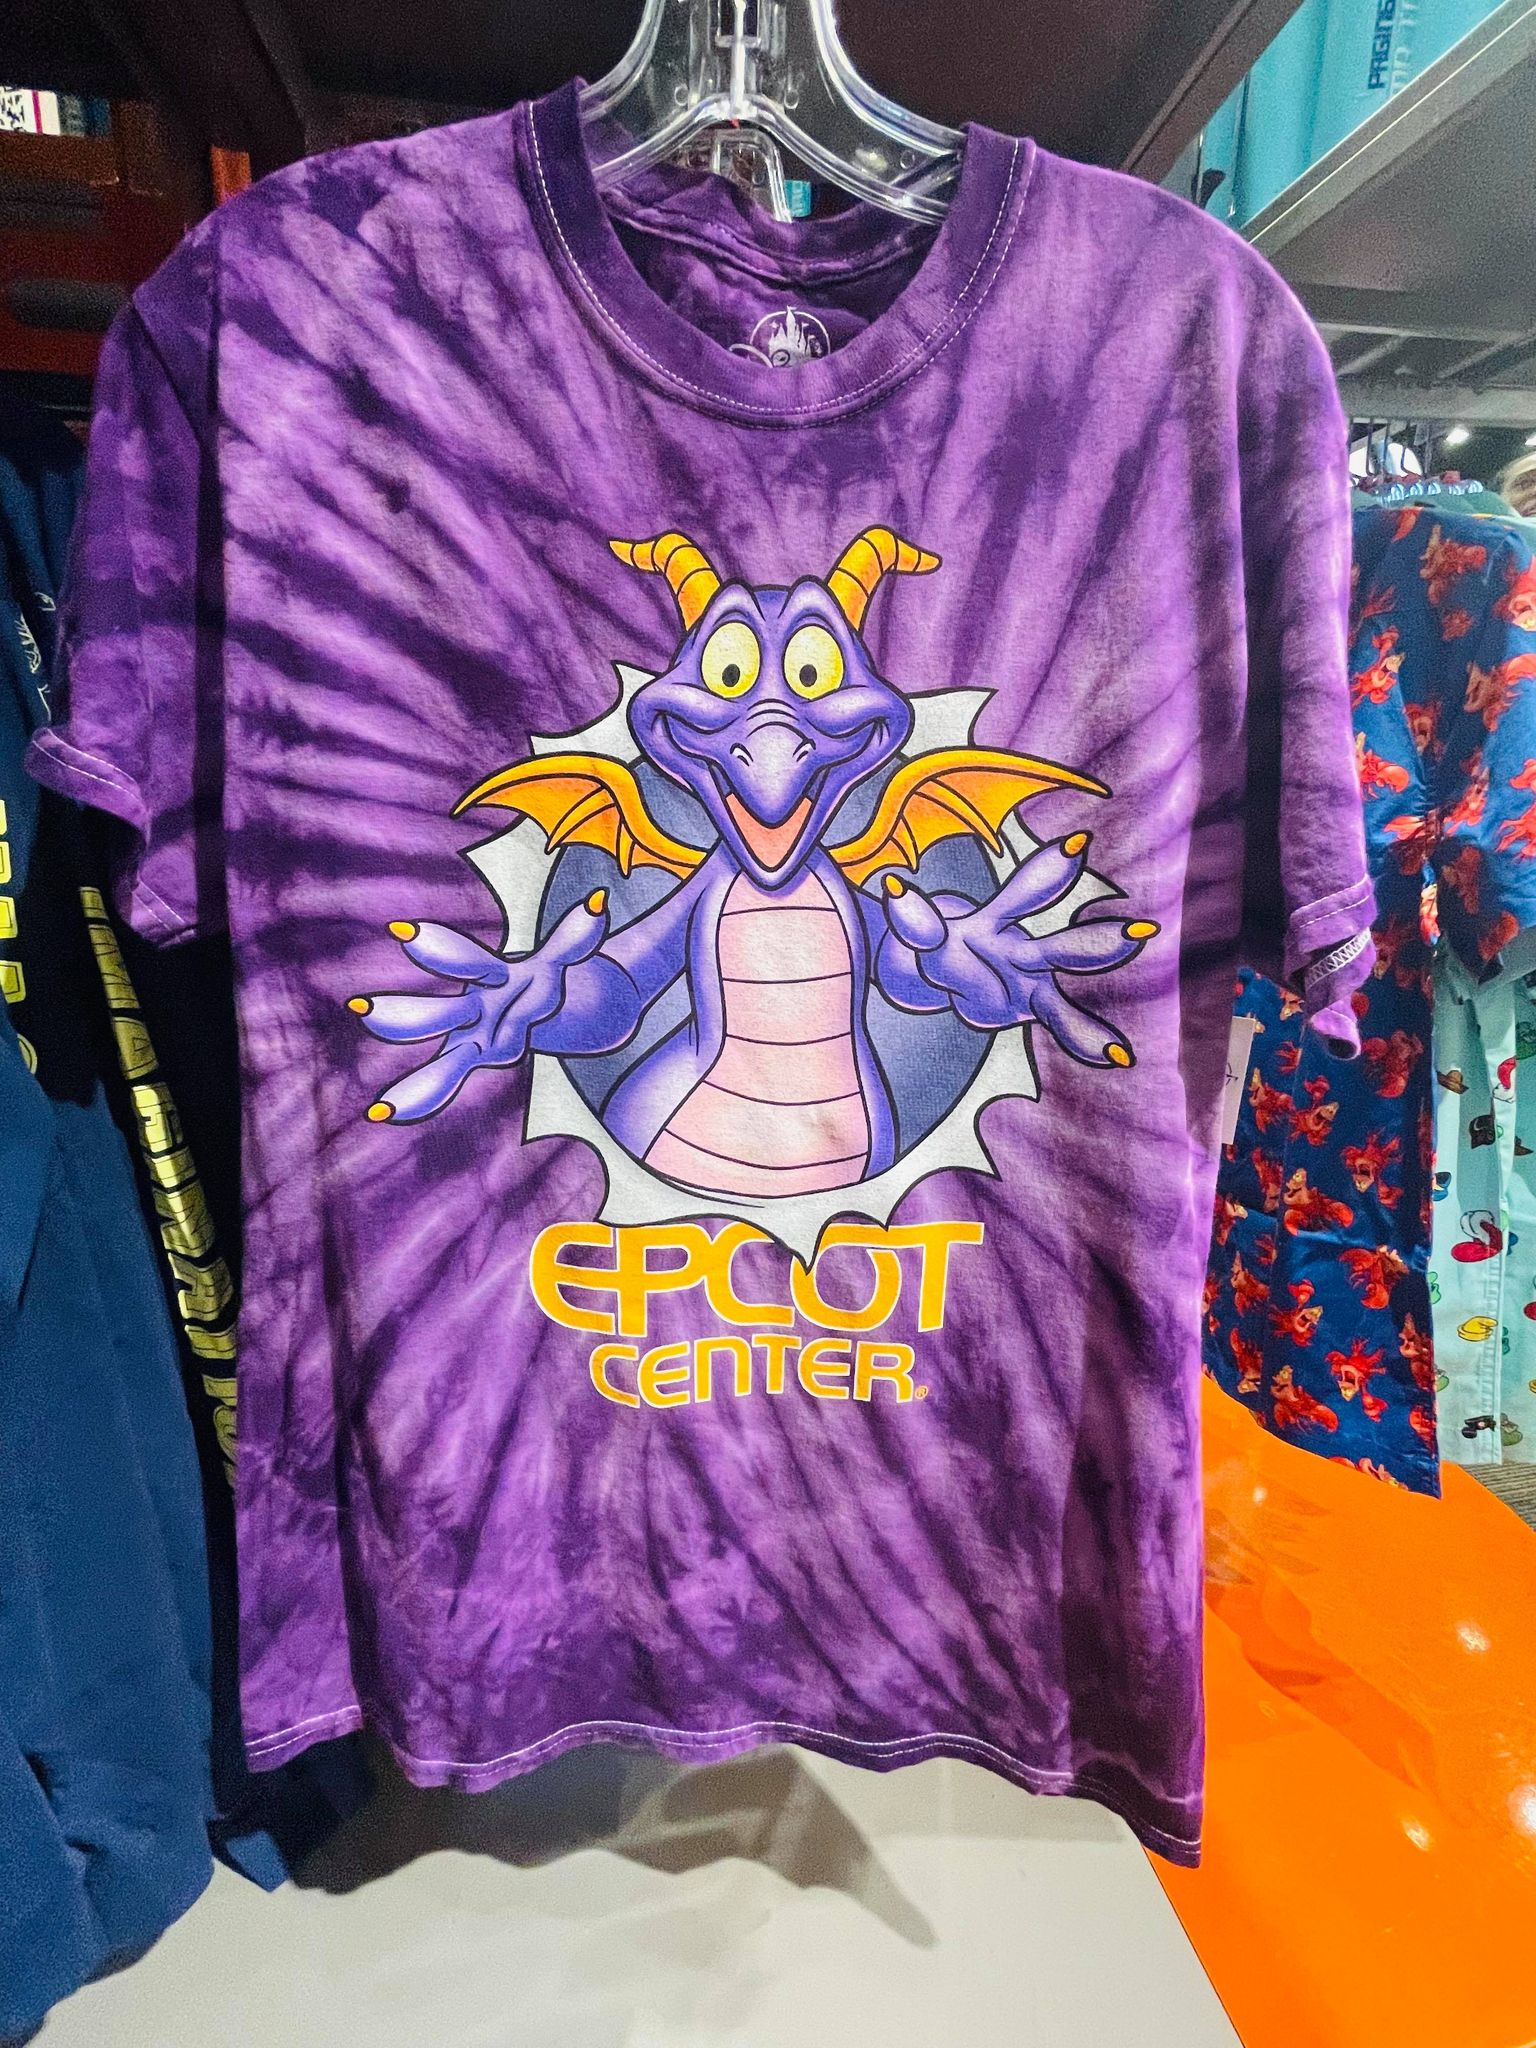 Two NEW Figment TShirts Now at MouseGear in EPCOT